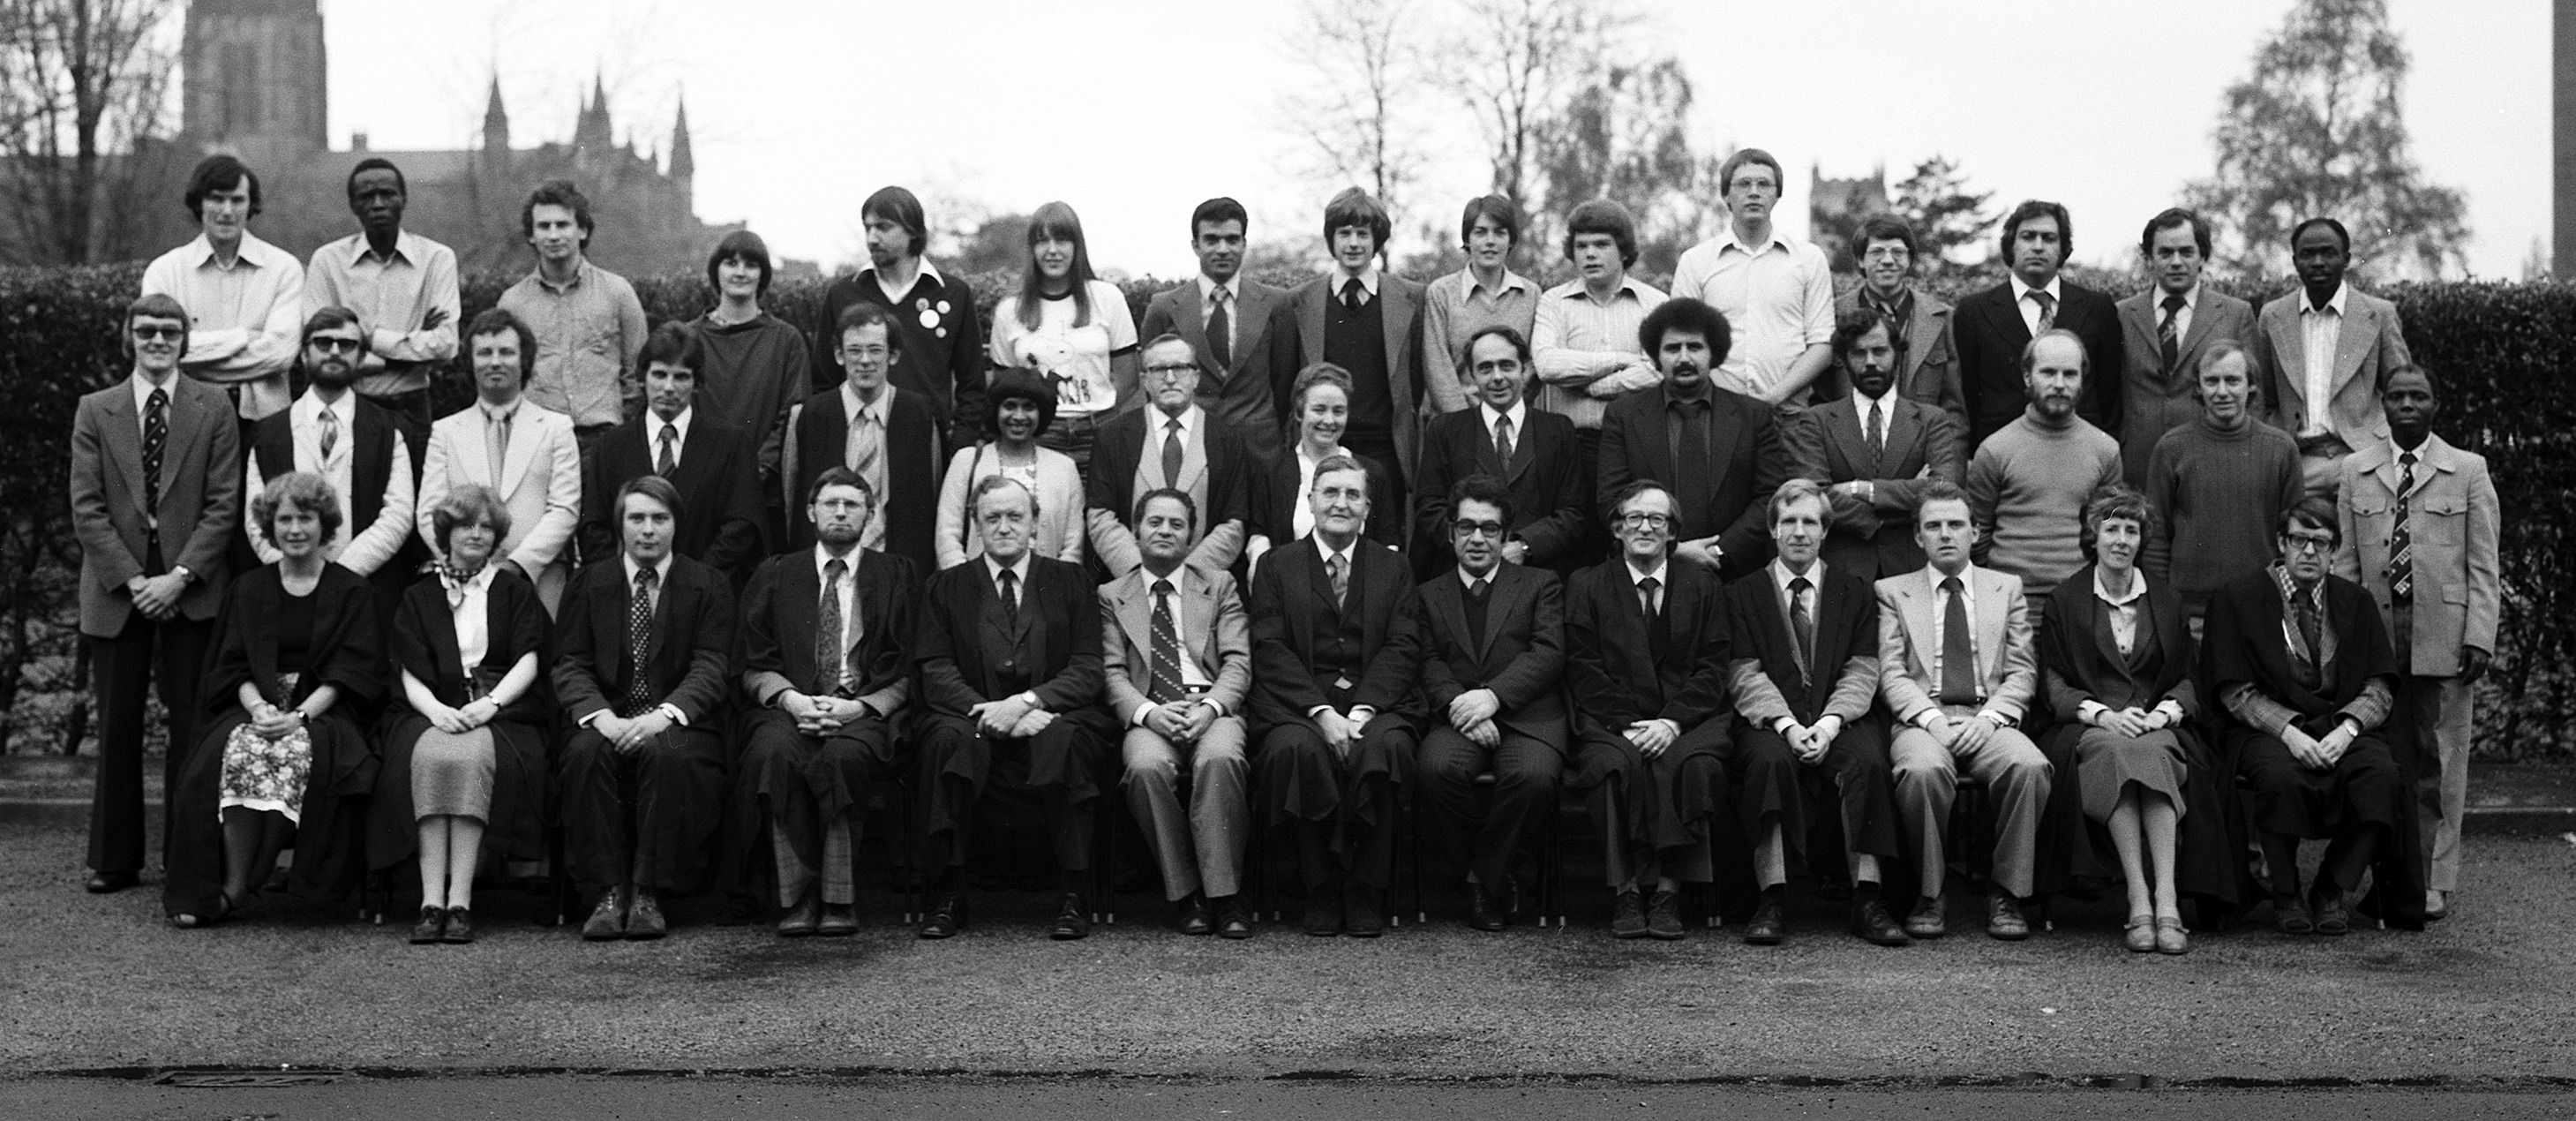 Geography Department Postgraduate Group Photo from 1979